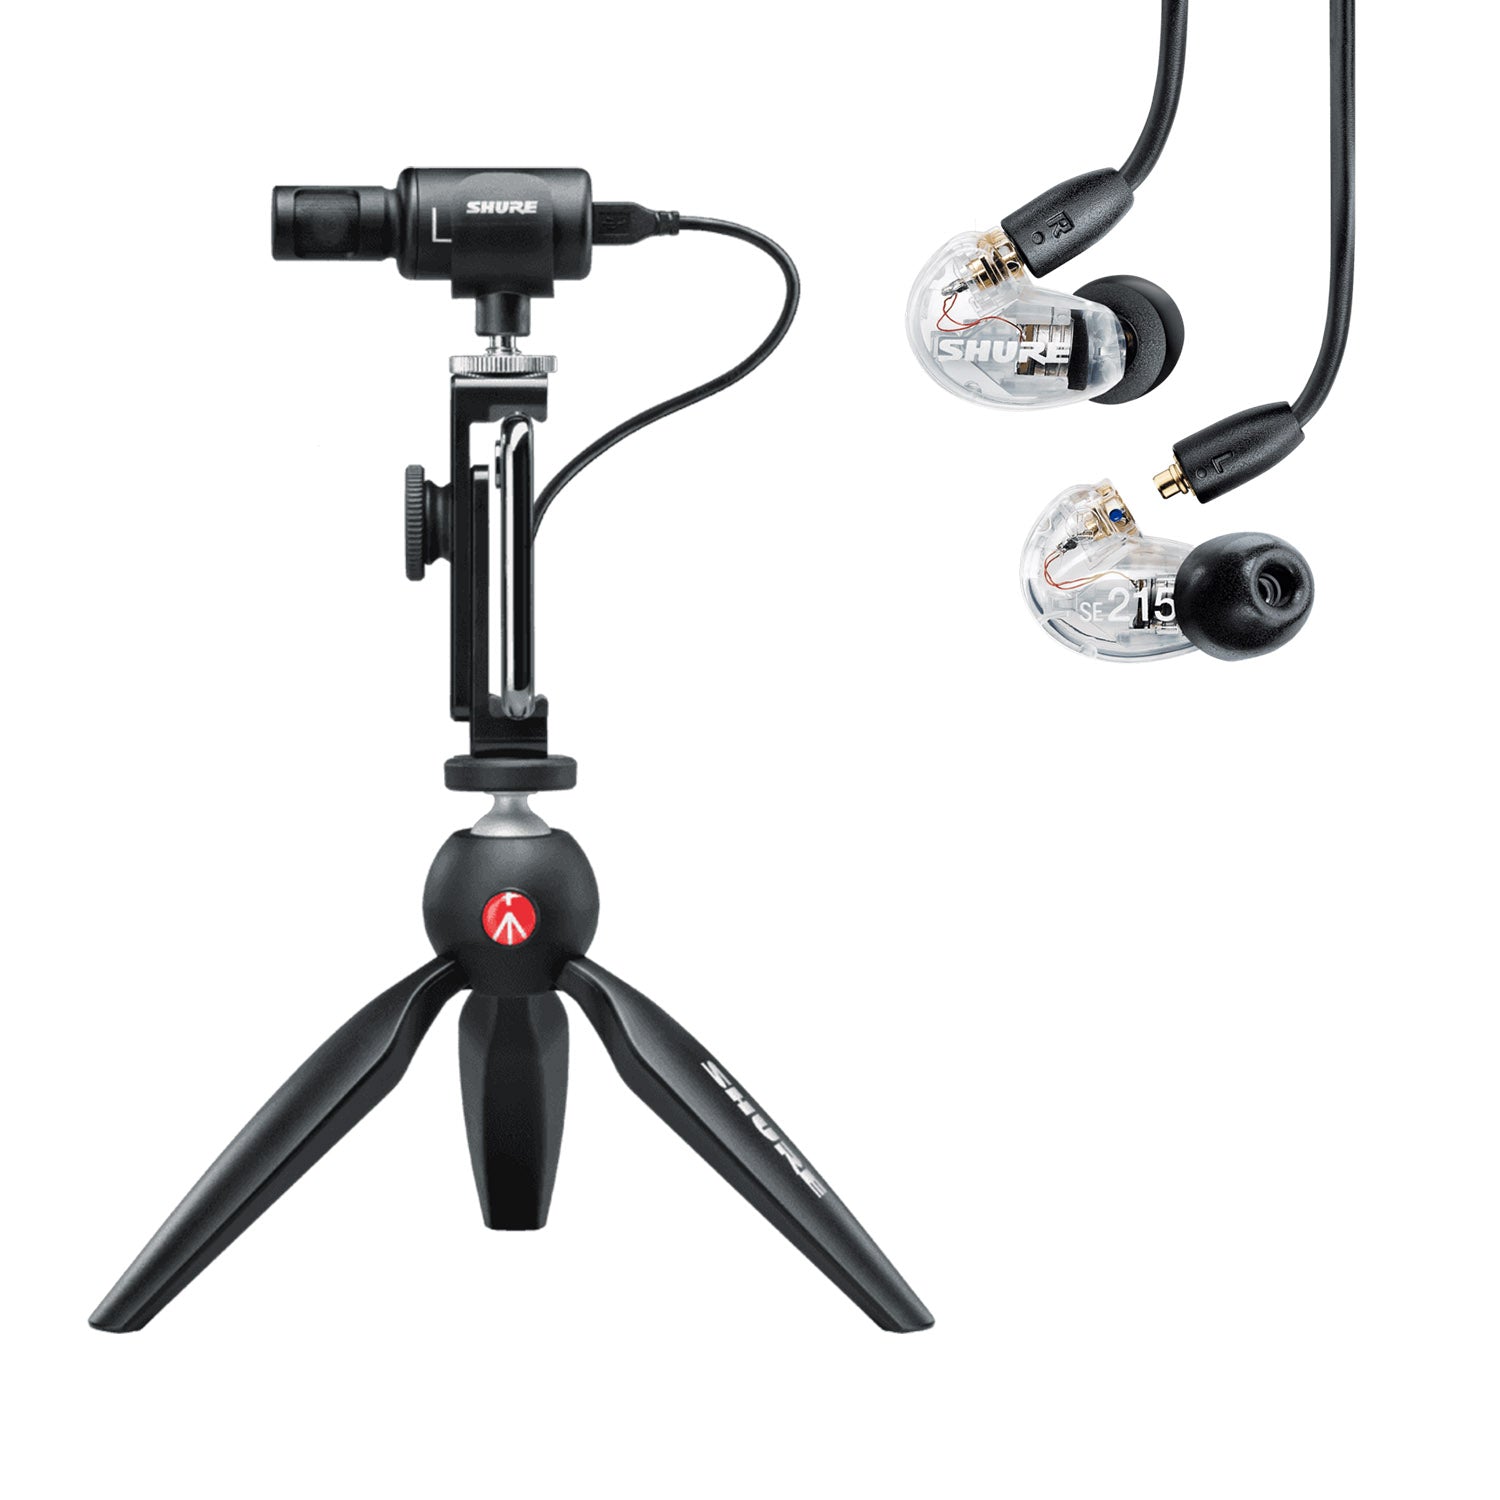 Shure Portable Videography Bundle With SE215 Earphones and MV88+ Video Kit including Digital Stereo Condenser Microphone - Hollywood DJ